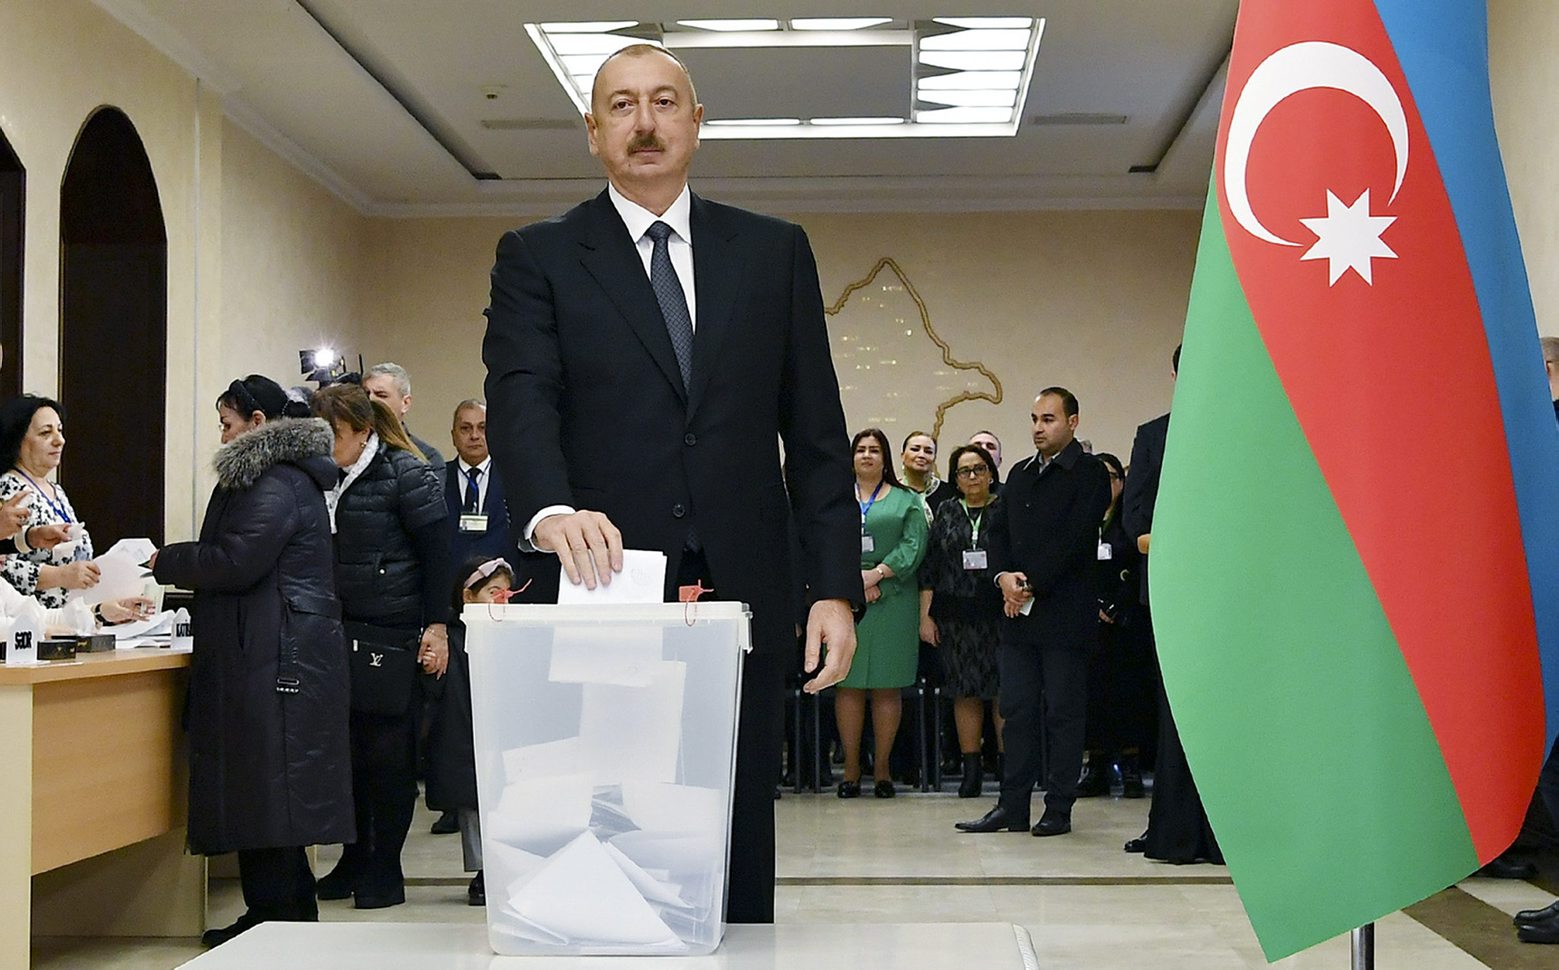 Azerbaijan President Ilham Aliyev casts his ballot at a polling station during parliamentary elections in Baku, Azerbaijan, Sunday, Feb. 9, 2020. Snap parliamentary elections are held in Azerbaijan after Aliyev dissolved parliament in December. Many opposition parties say they didn't have time to prepare for the campaign and have decided to boycott the elections. (Azerbaijan Presidential Press Office via AP)
Ilham Aliyev Azerbaijan Election